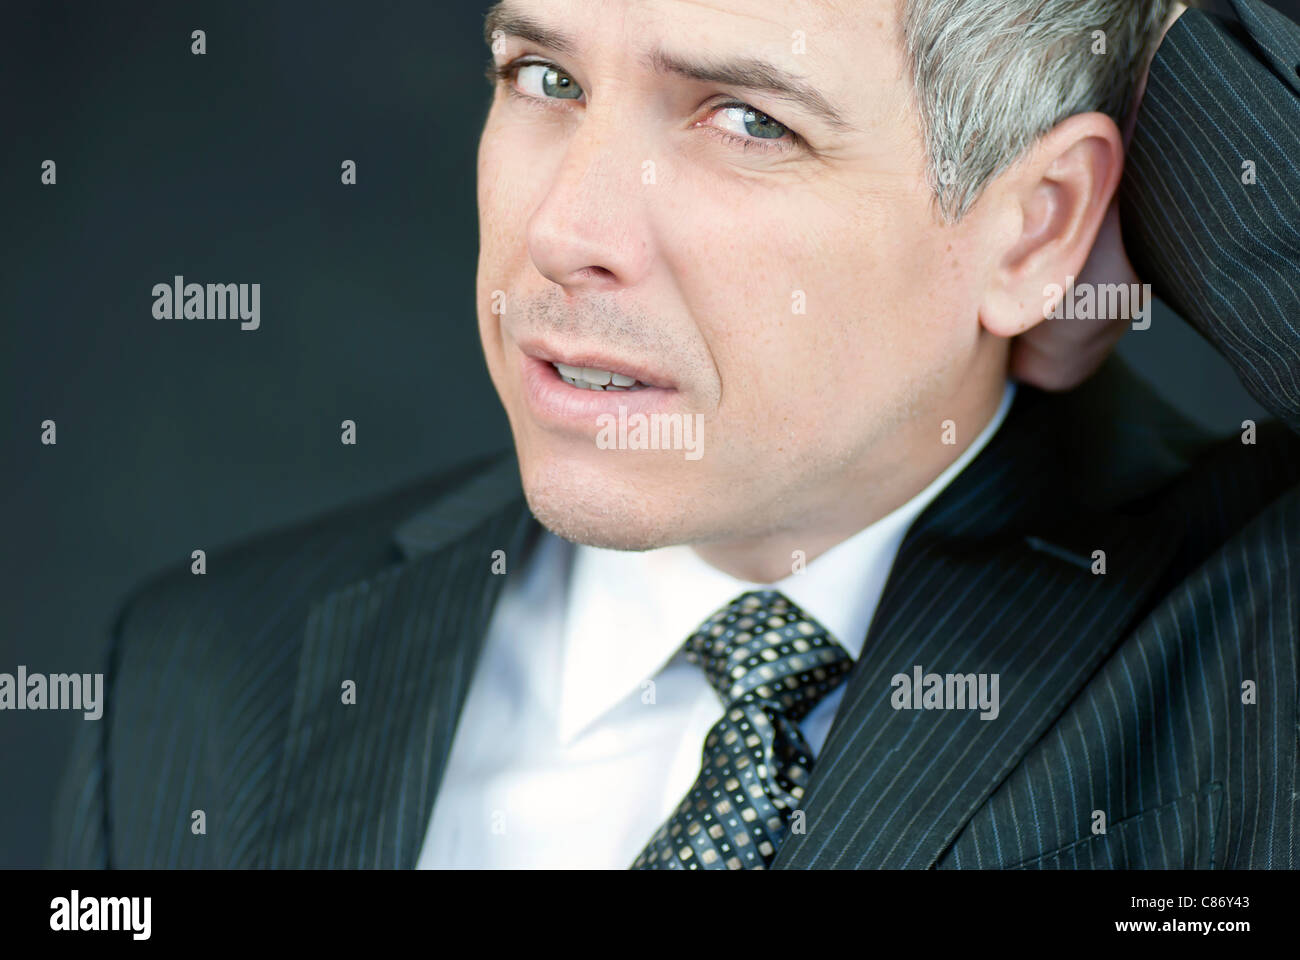 Close-up of a stressed businessman looking to camera. Stock Photo